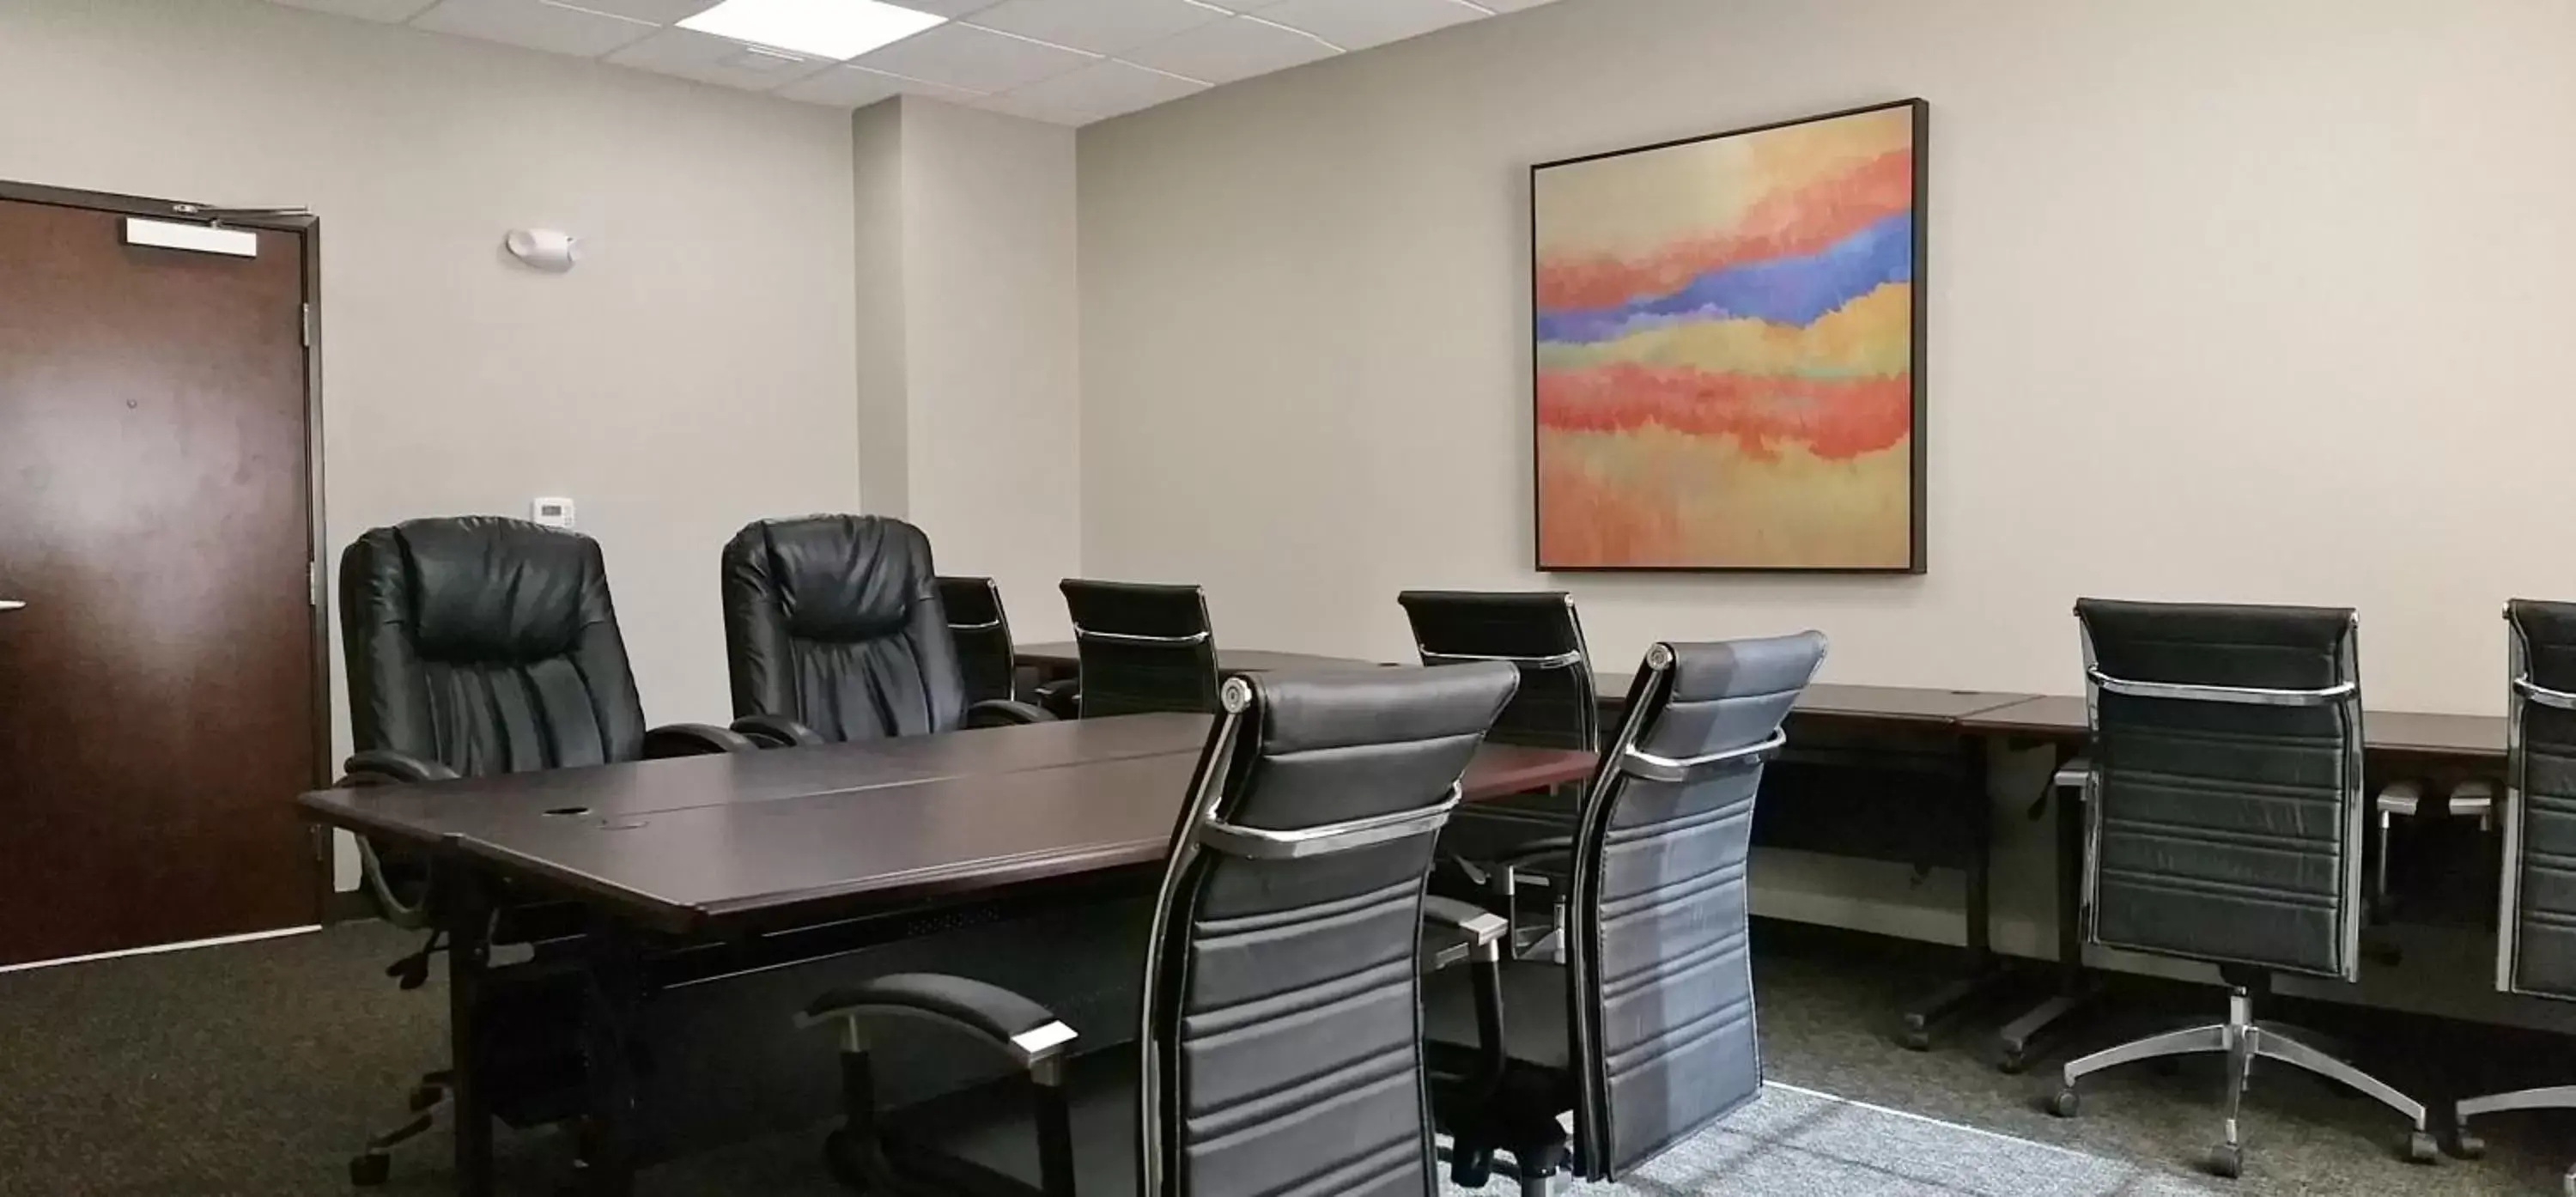 Business facilities in MainStay Suites Midland